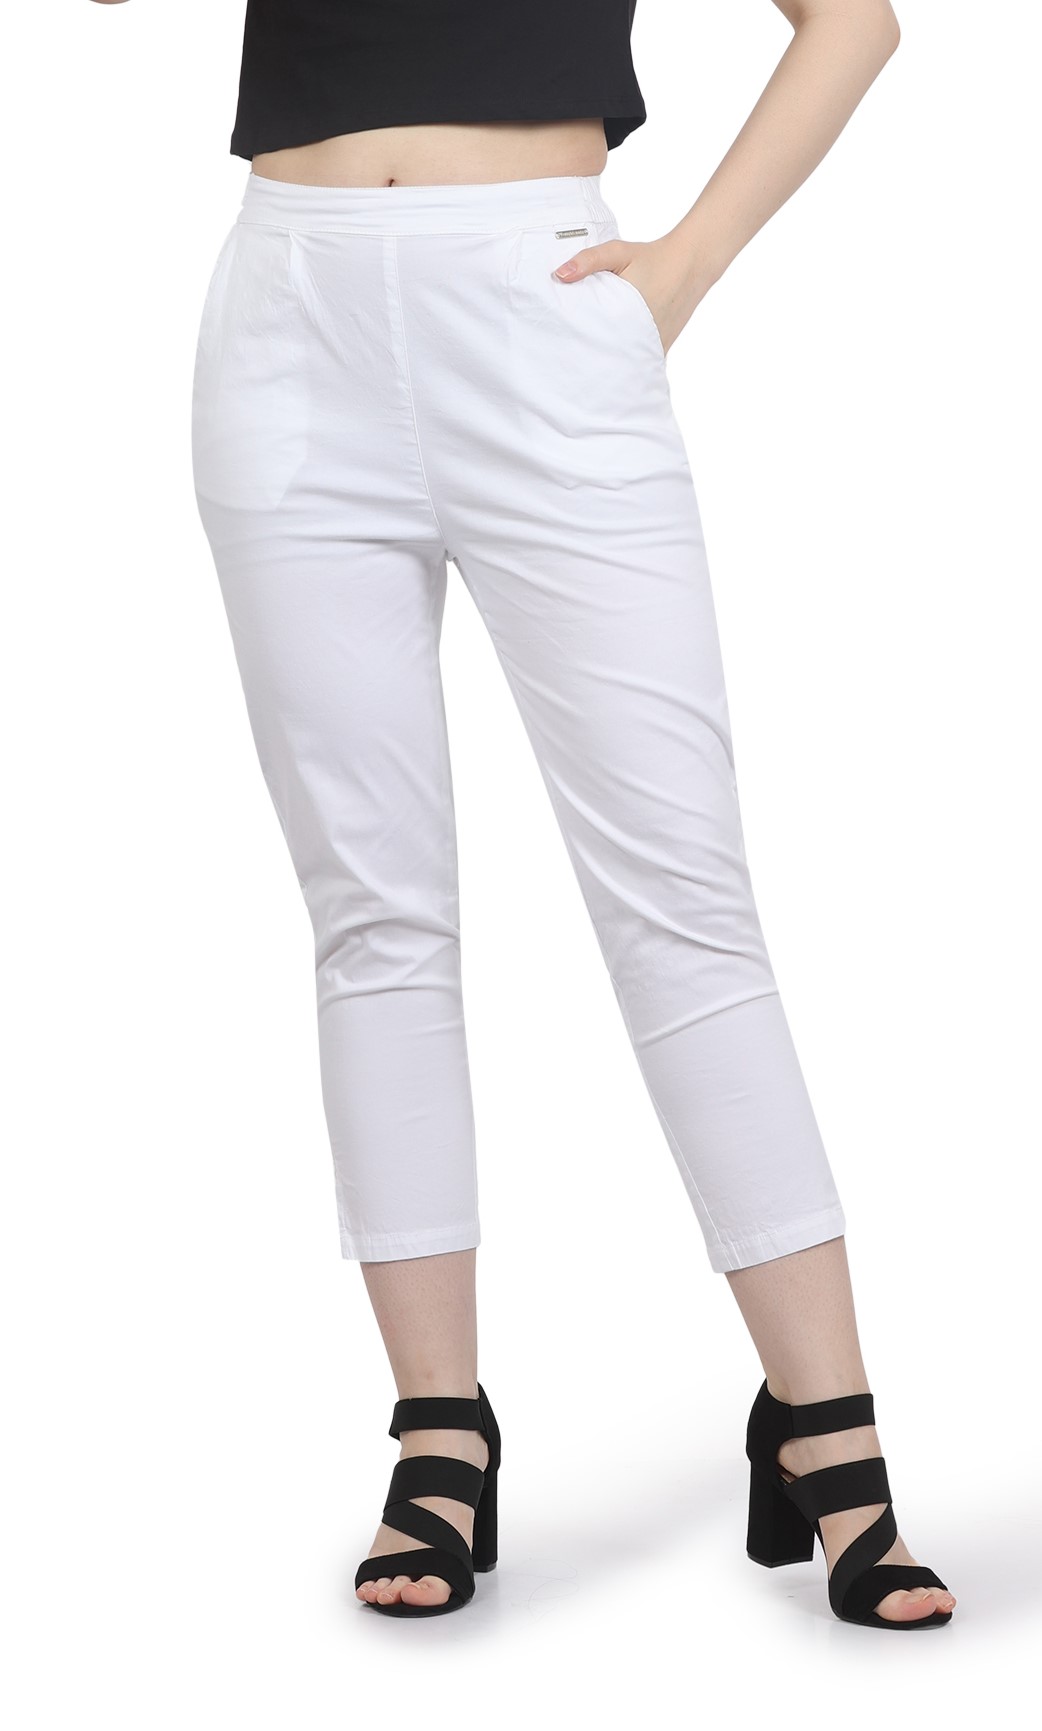 Off White Cotton Slim Fit Embroidered Cigarette Trousers For Women's -  Naari - 3107567